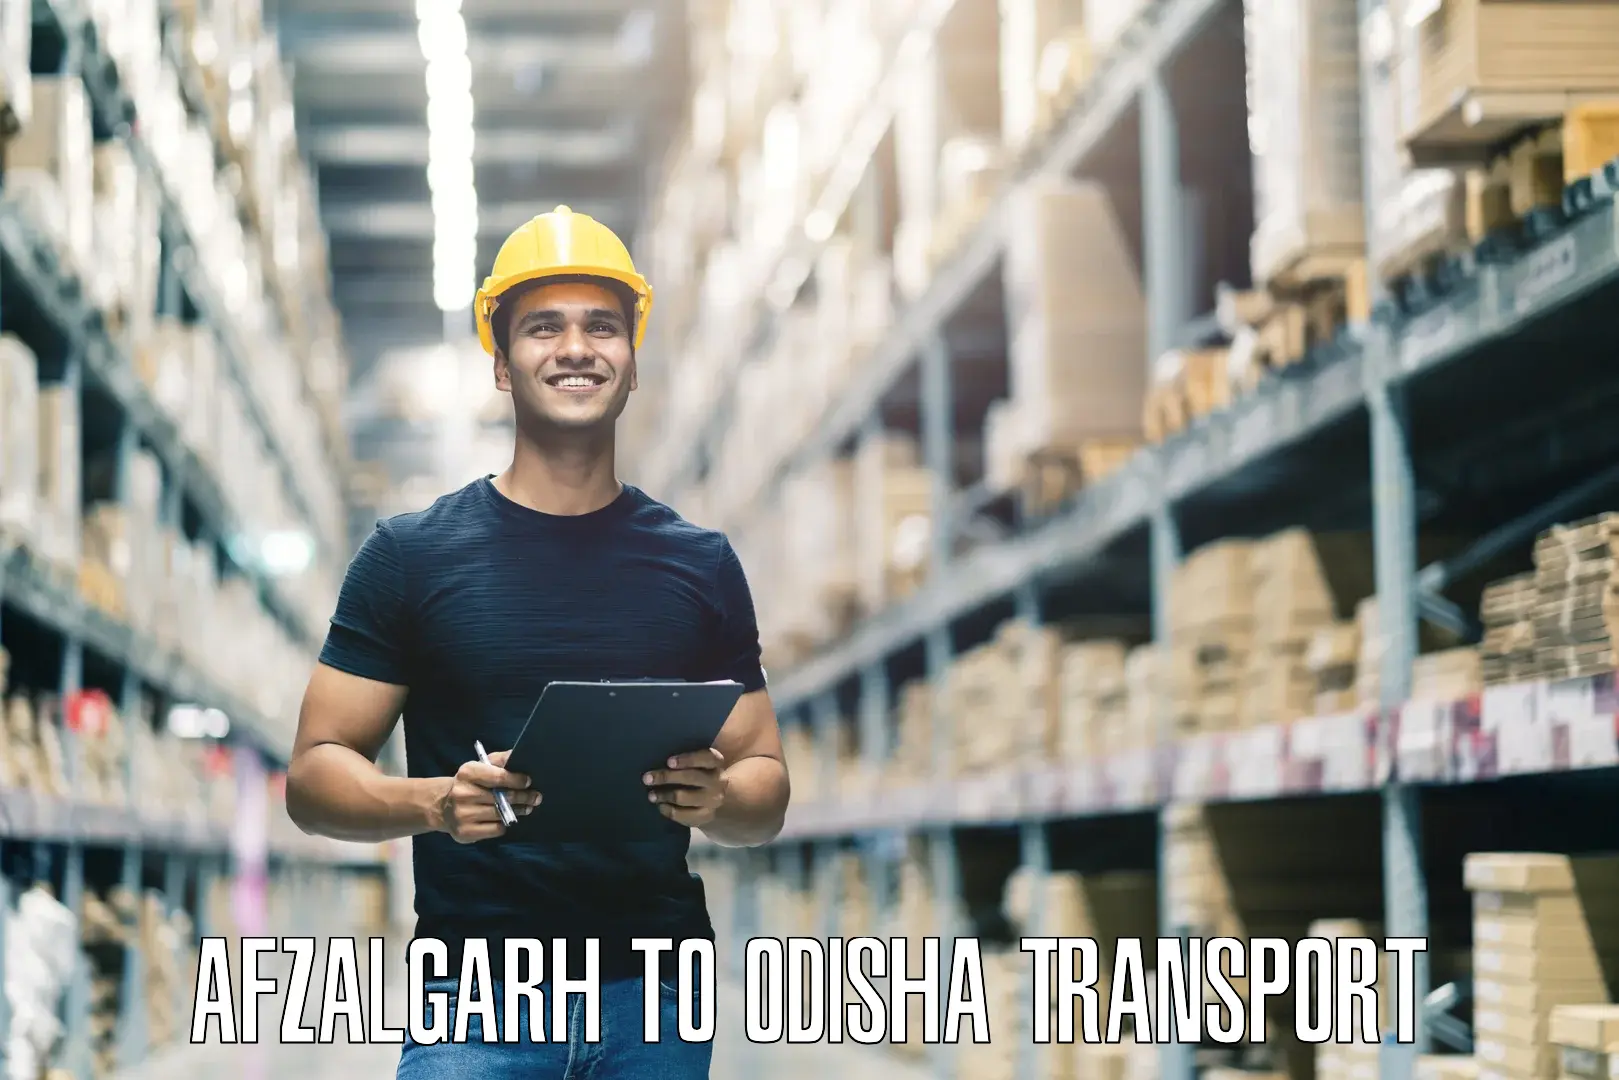 Vehicle transport services in Afzalgarh to Mohana